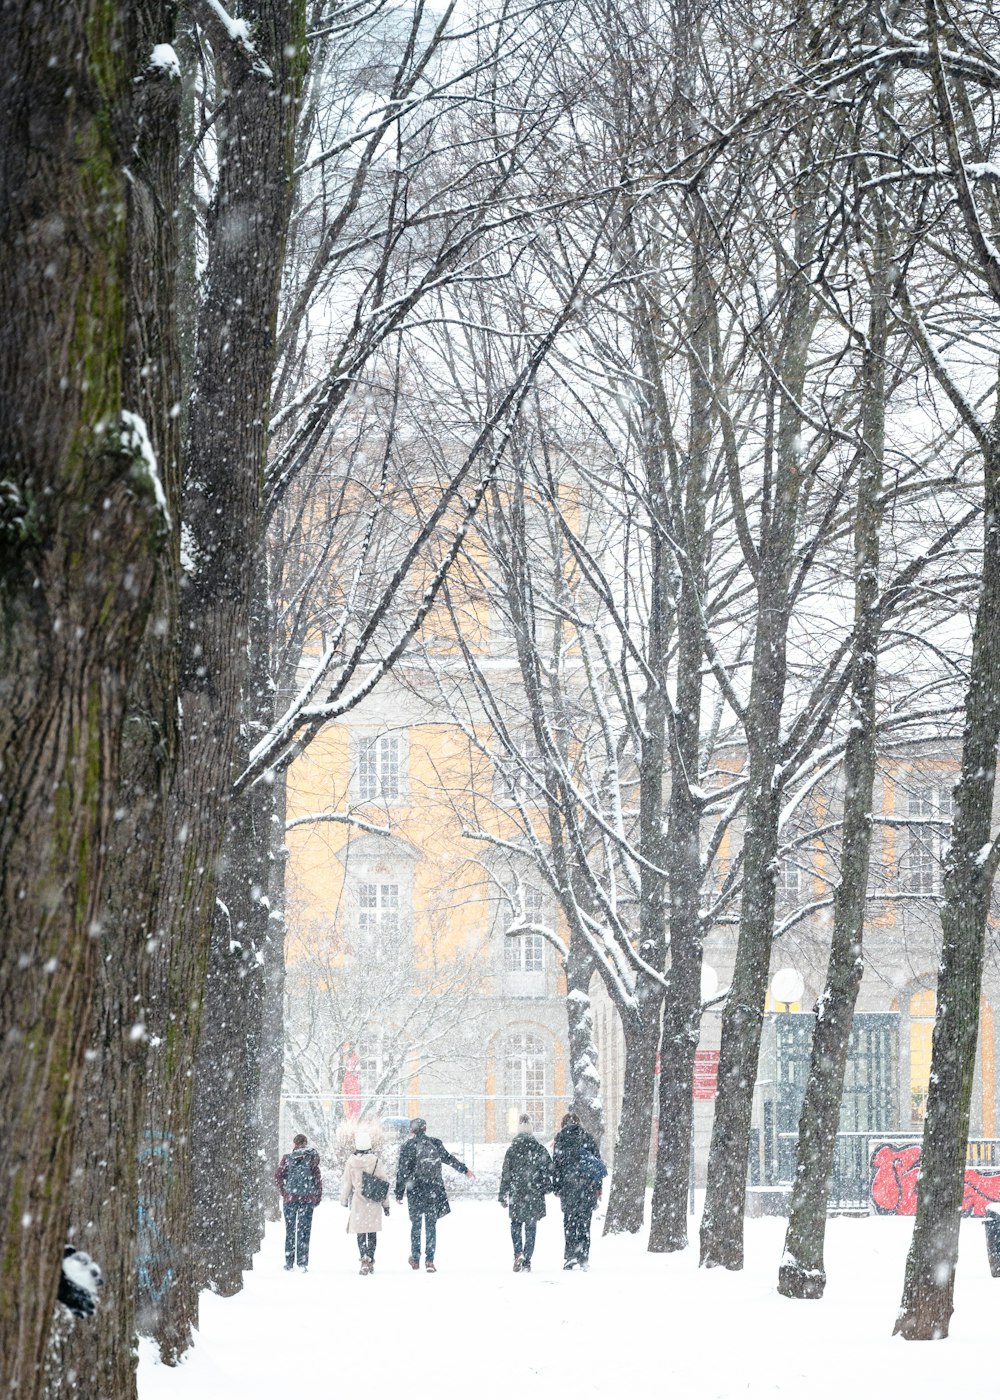 a group of people walking through a snow covered park